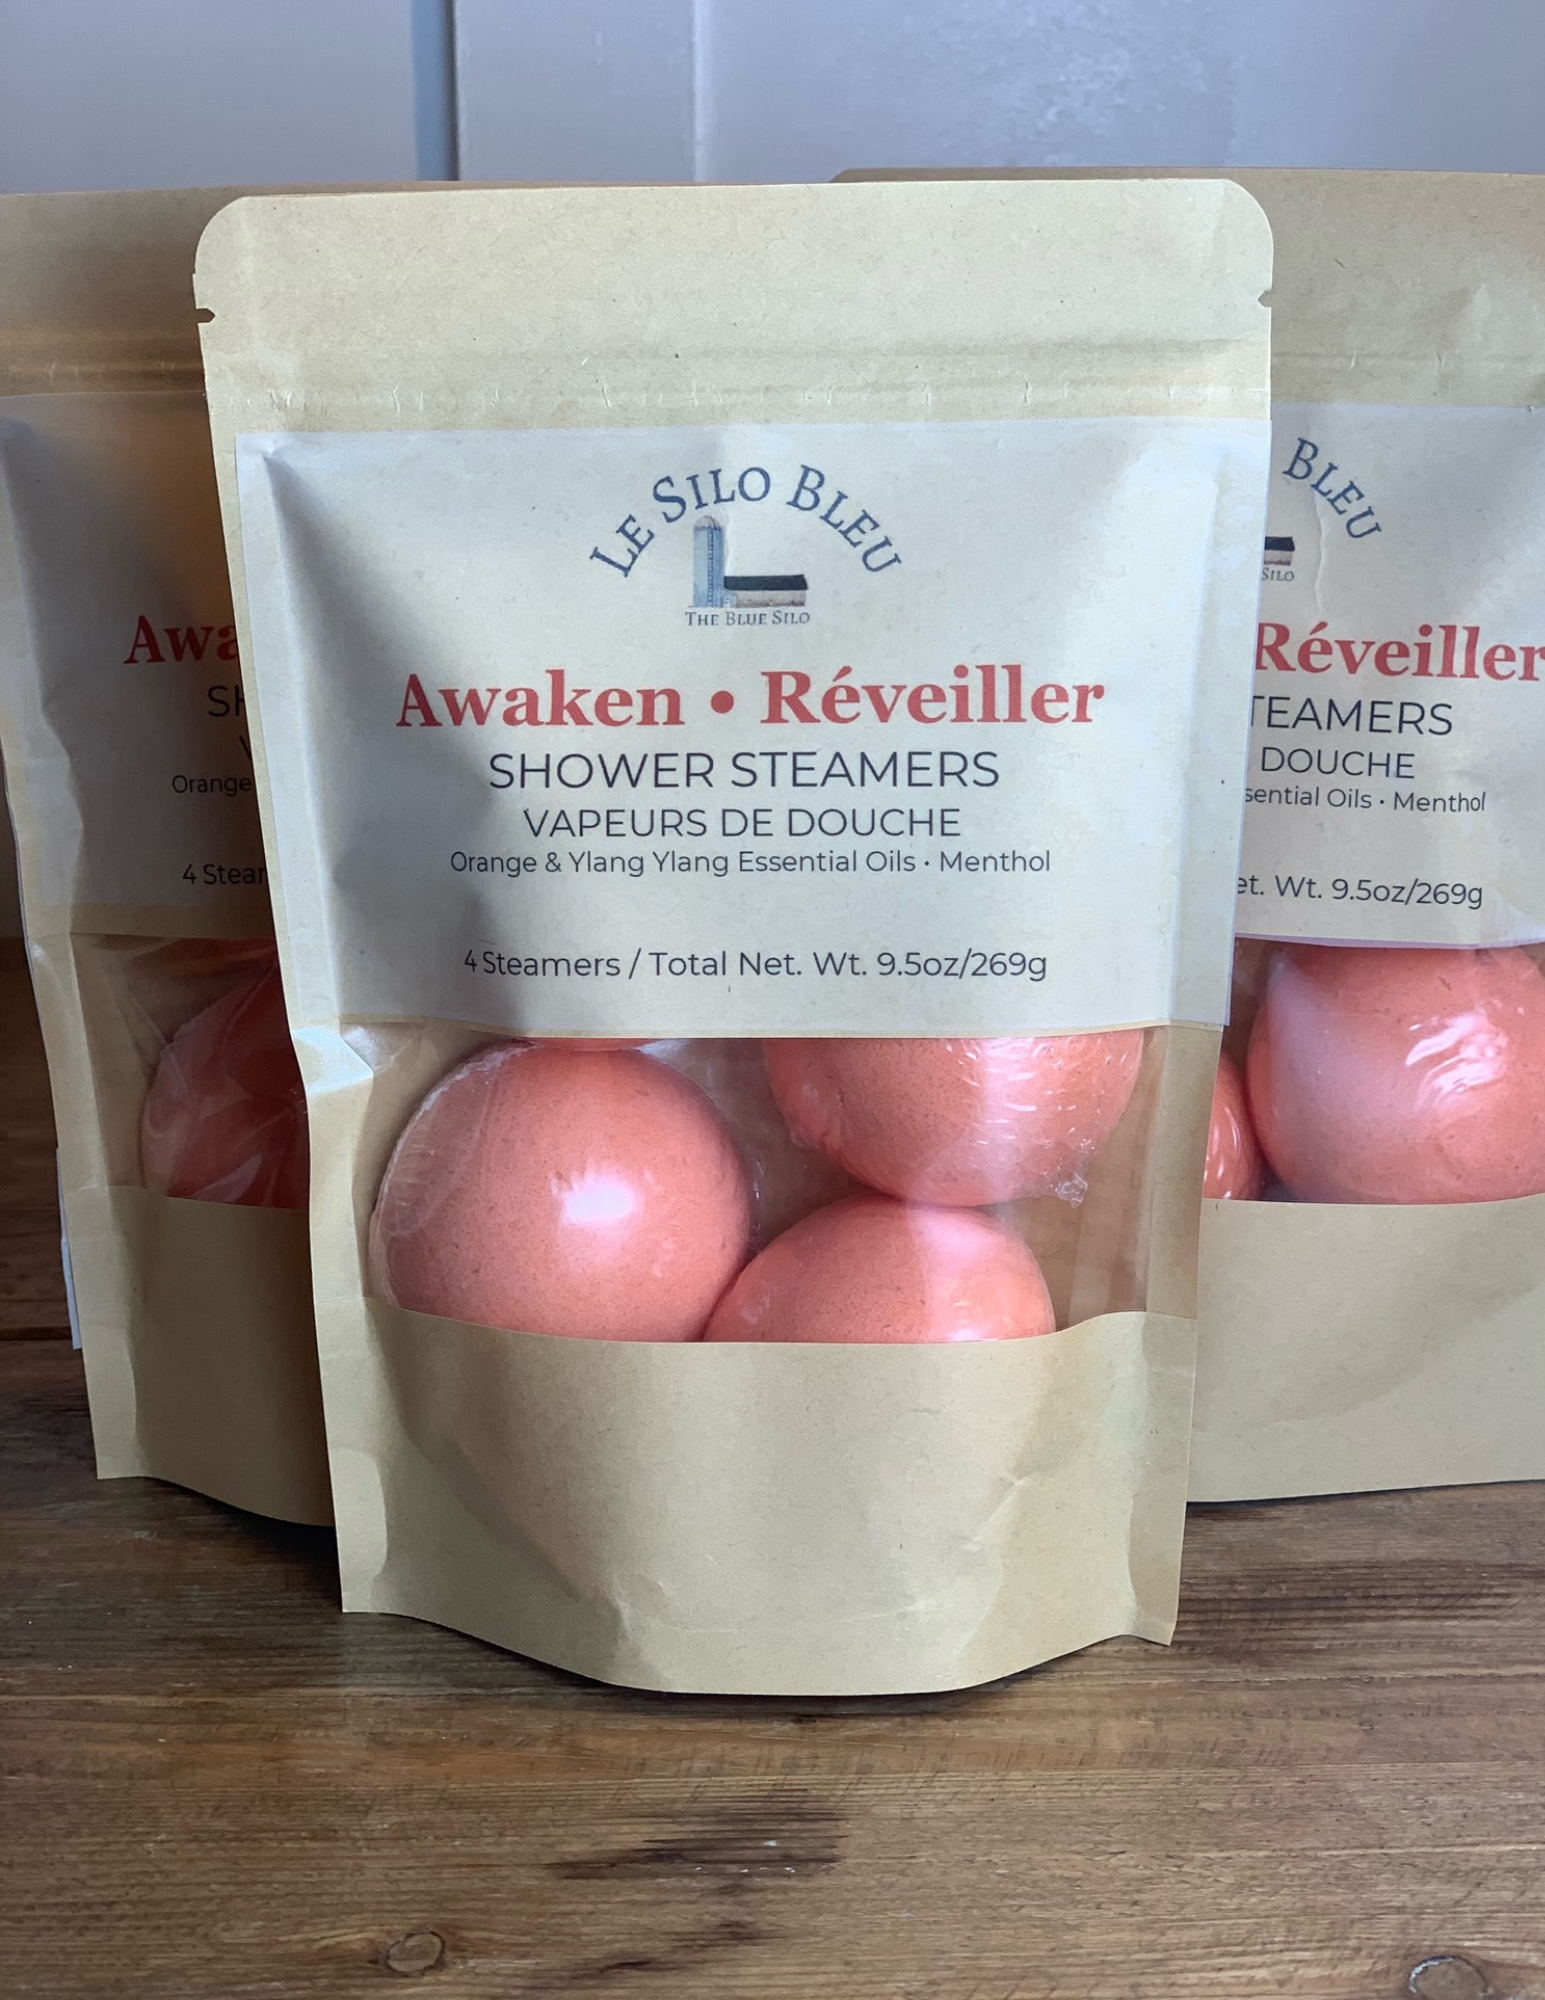 Three packages of Awaken Reveiller Shower Steamers sit on a wooden table with a white bead board background. Three orange steamers are visible with the package windows.